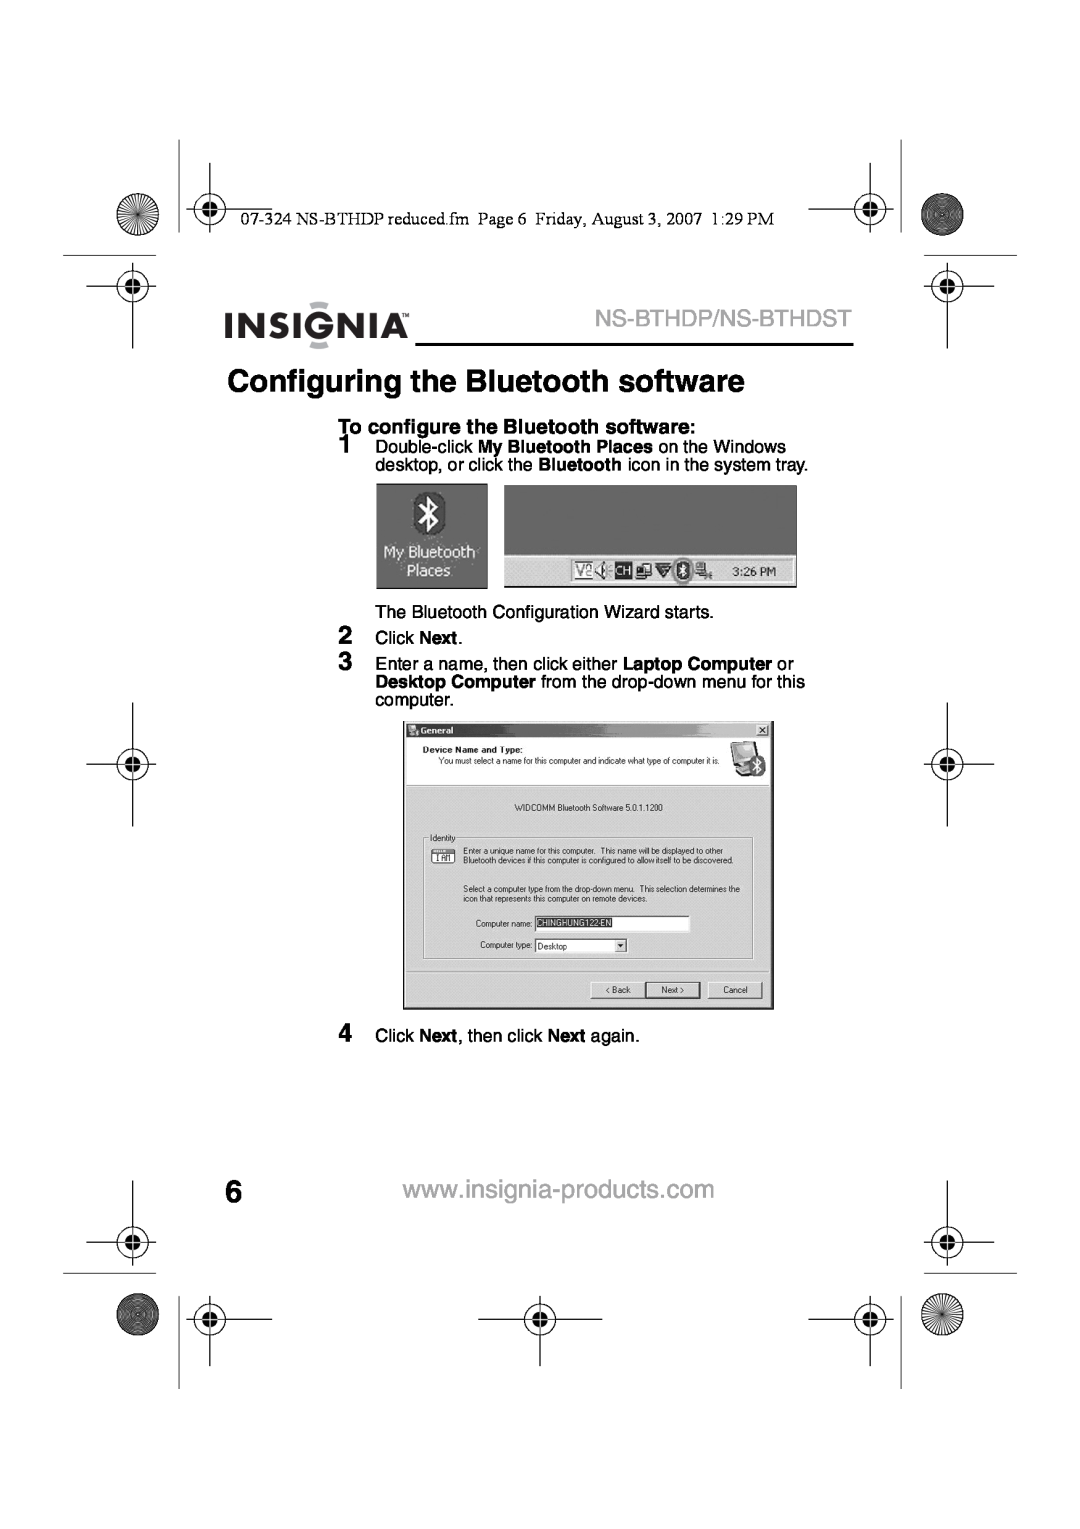 Insignia NS-BTHDST manual Configuring the Bluetooth software, Ns-Bthdp/Ns-Bthdst, To configure the Bluetooth software 